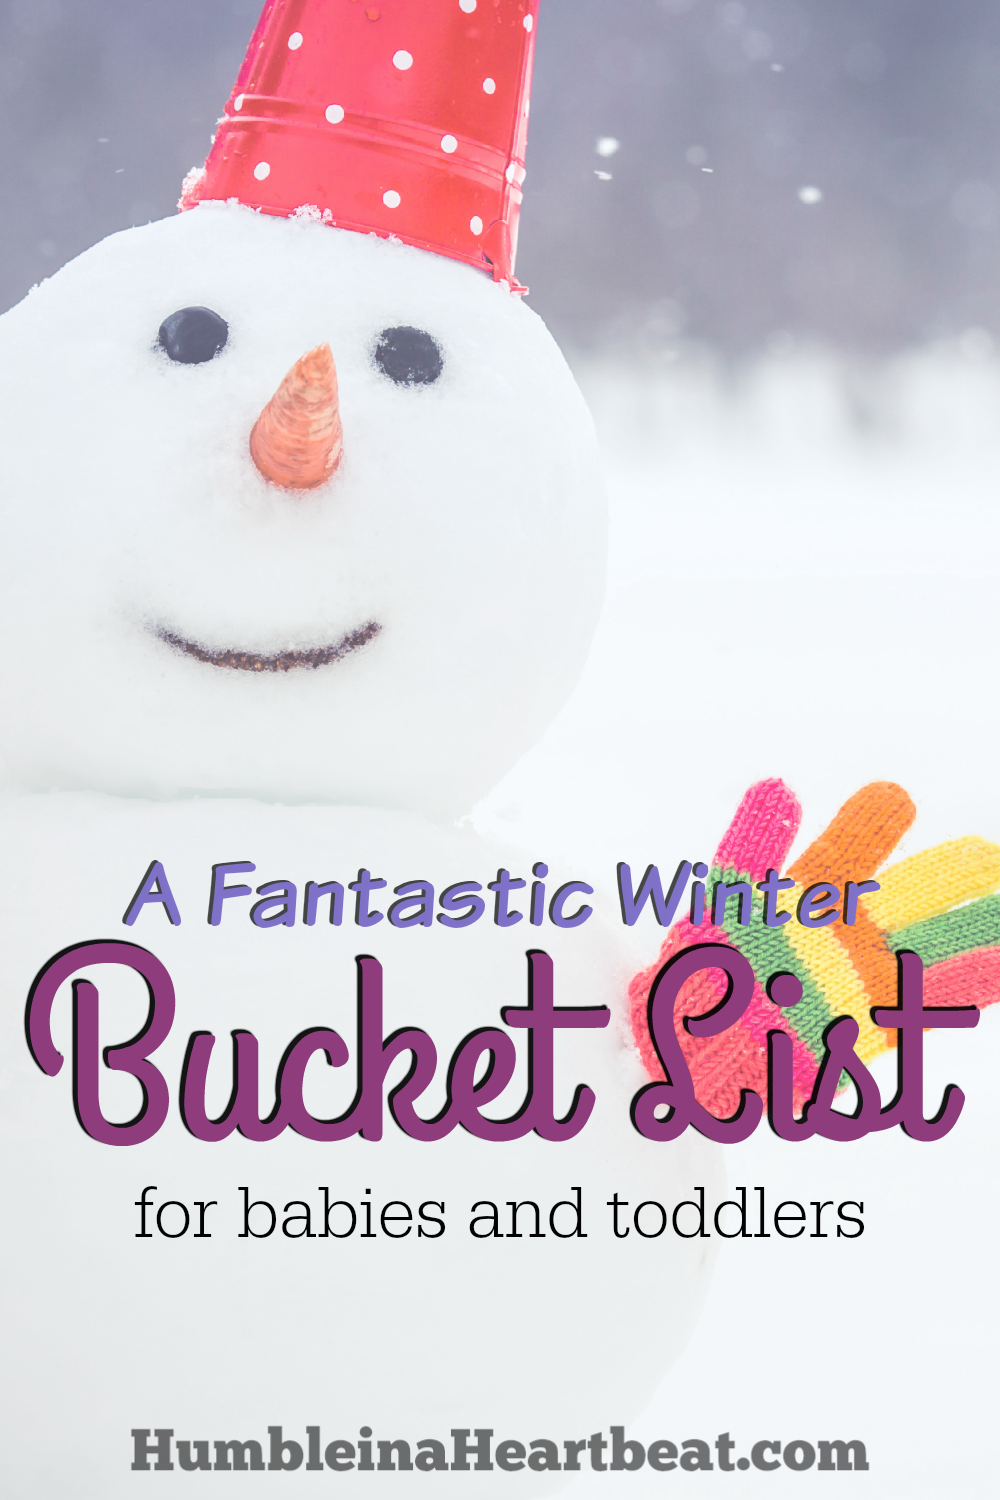 Babies and toddlers love the magic of winter, so don't let the season pass by without taking them outside to enjoy the snow!